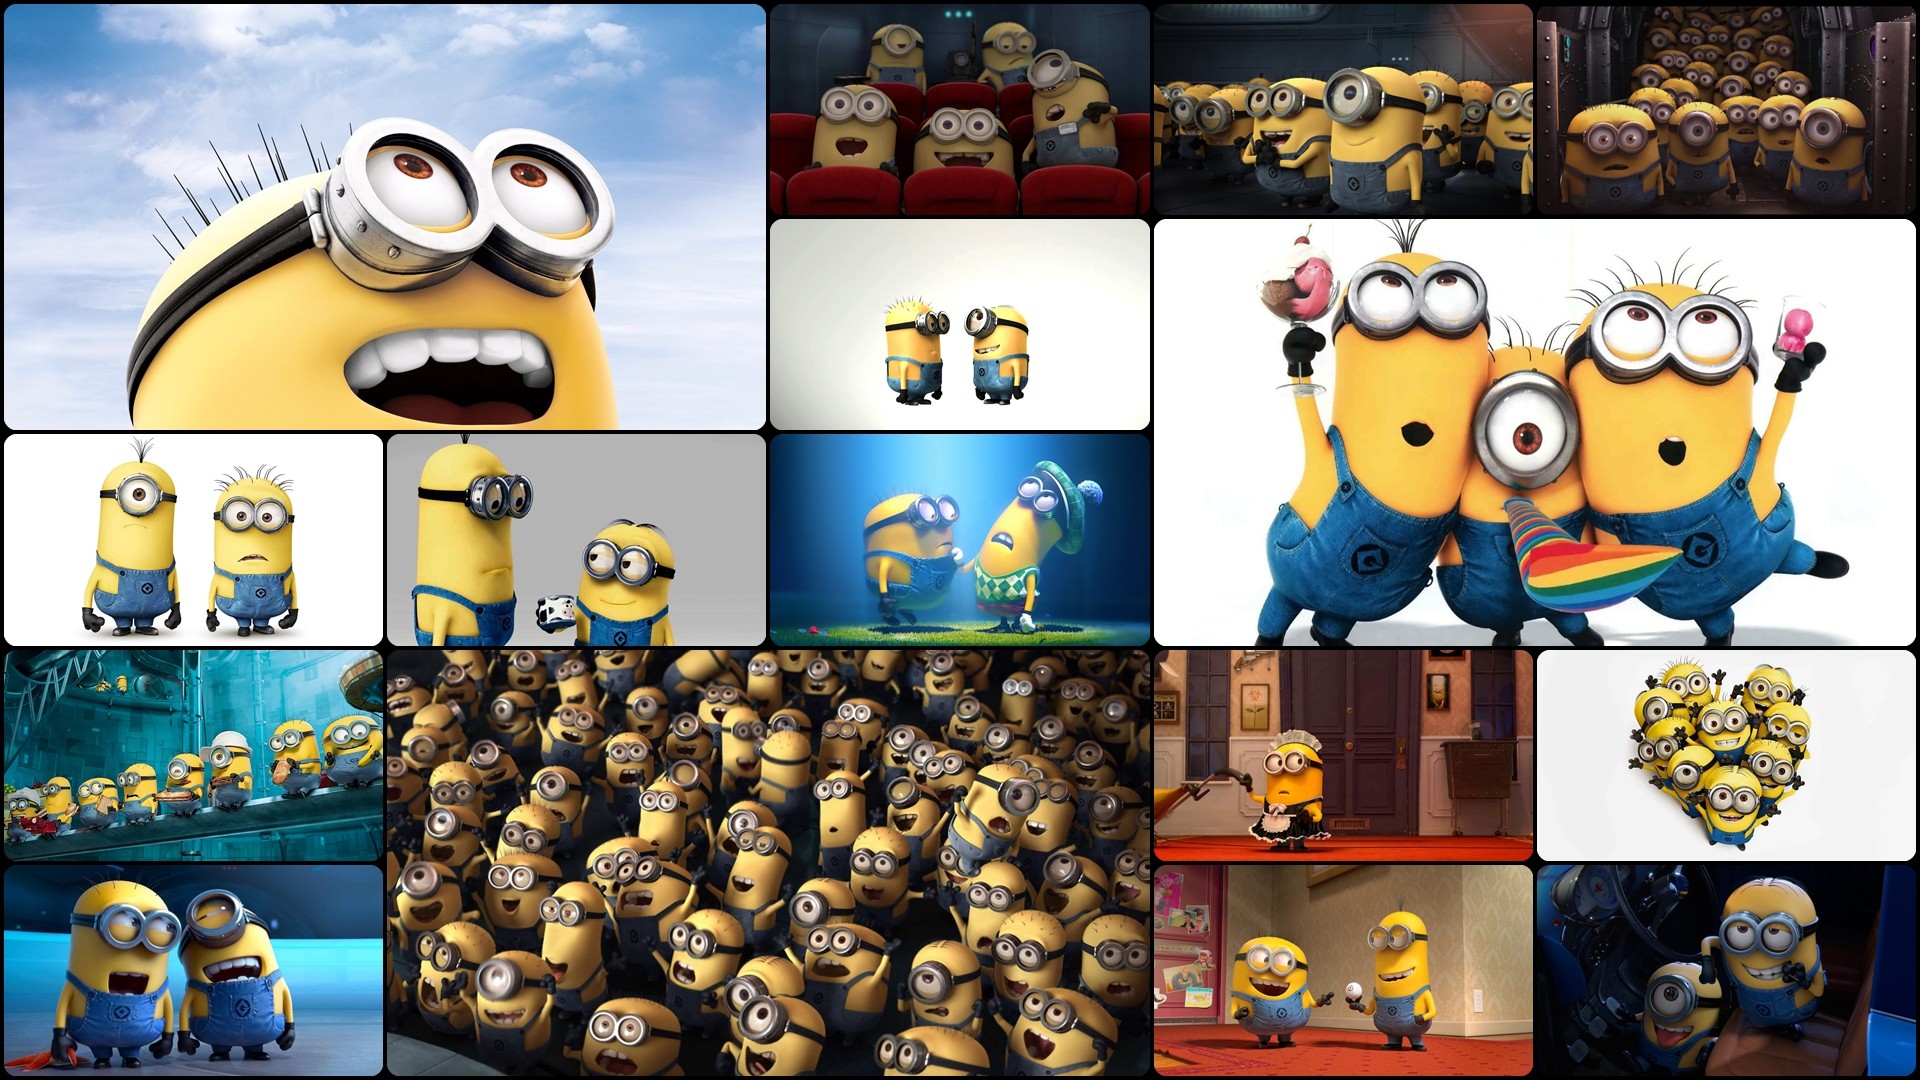 Wallpaper  1680x1050 px Despicable Me minions 1680x1050  wallup   1228445  HD Wallpapers  WallHere